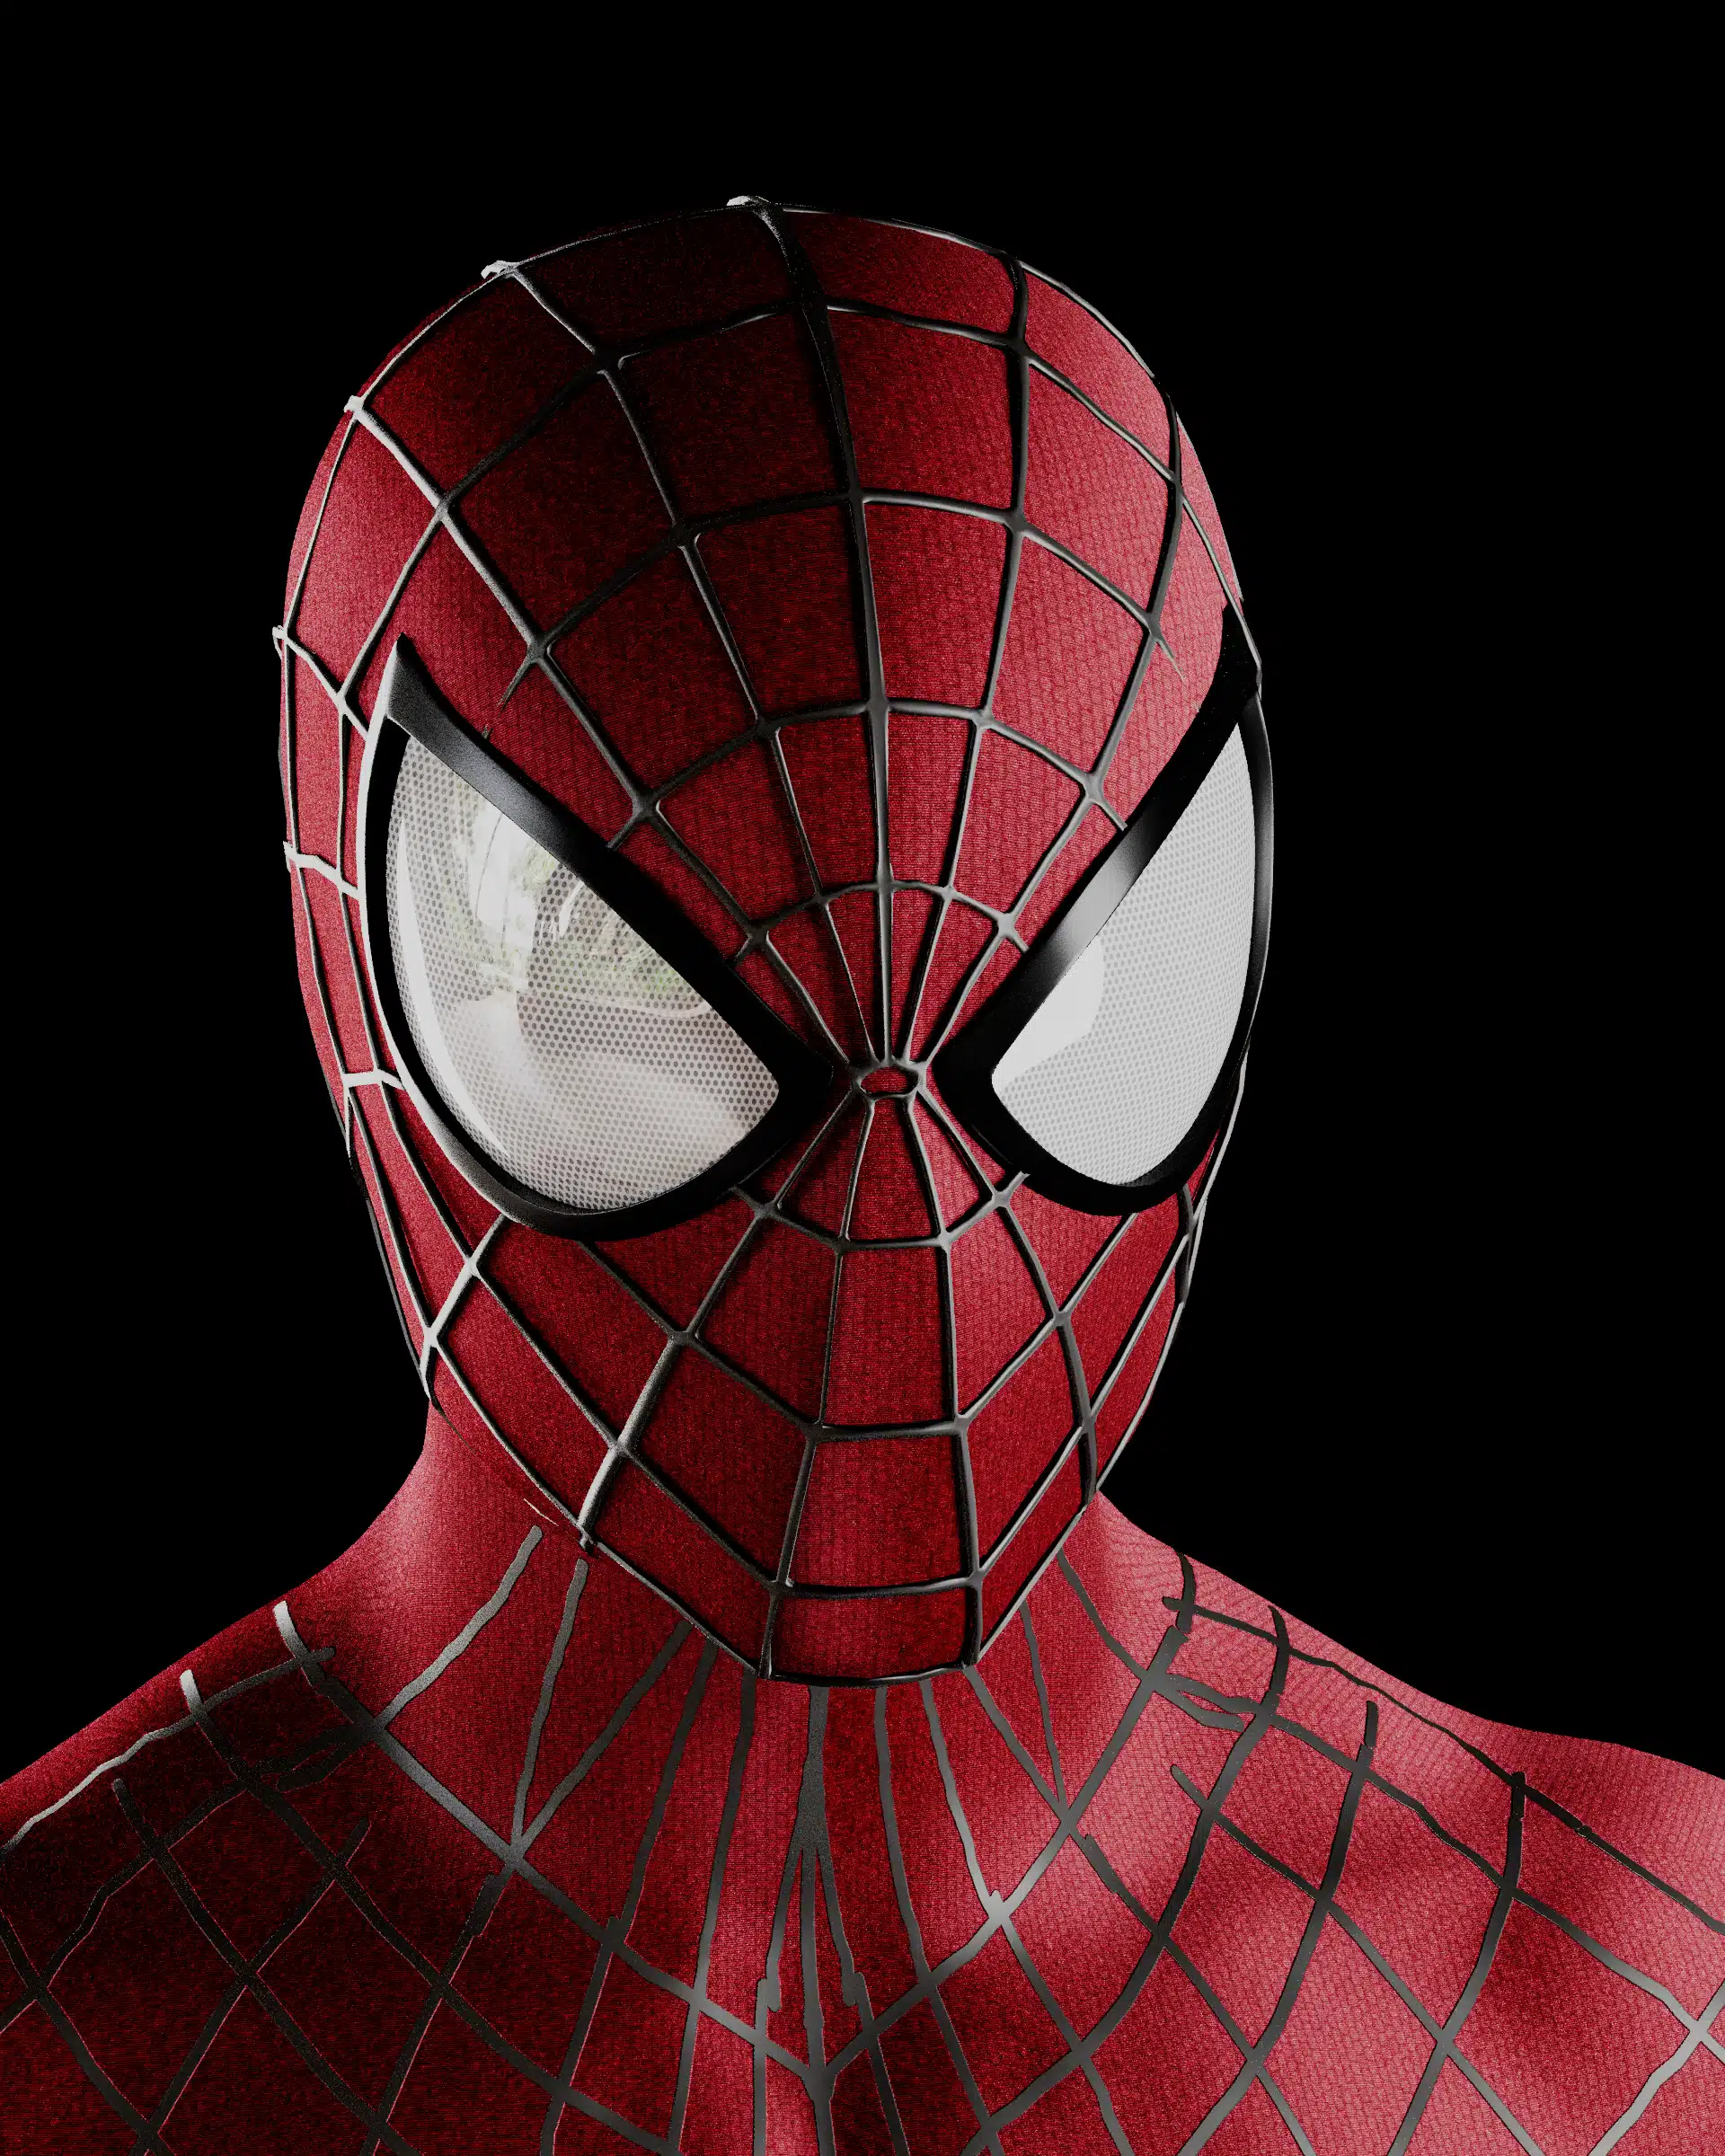 Marvel's Spider-Man Remastered First-Person Mod Out Now on PC